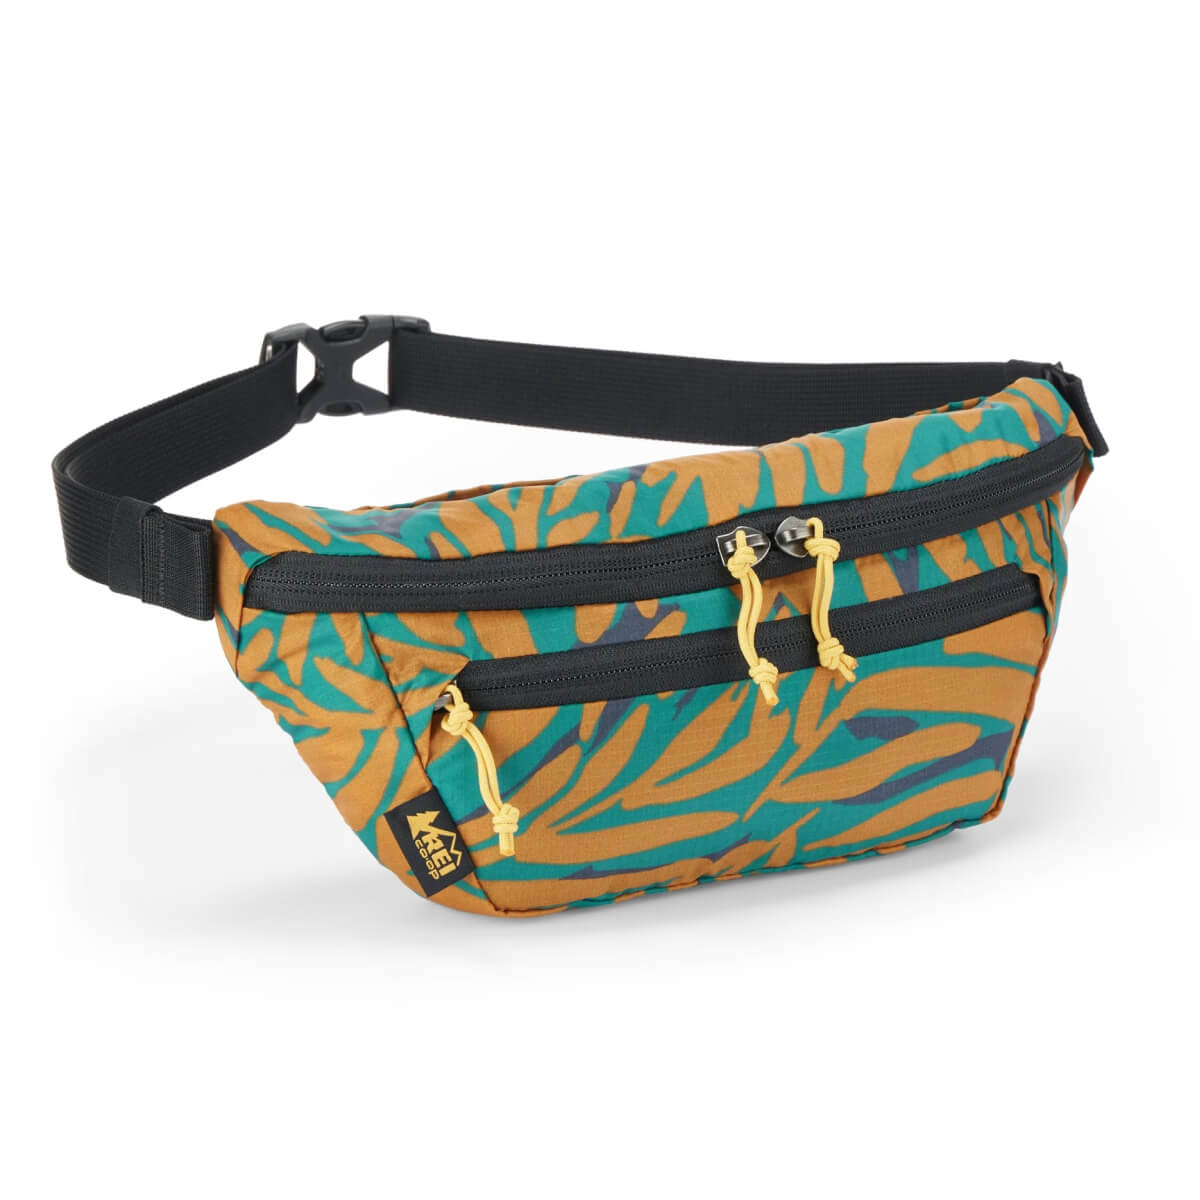 REI Co-op Trail 2 fanny pack for hiking